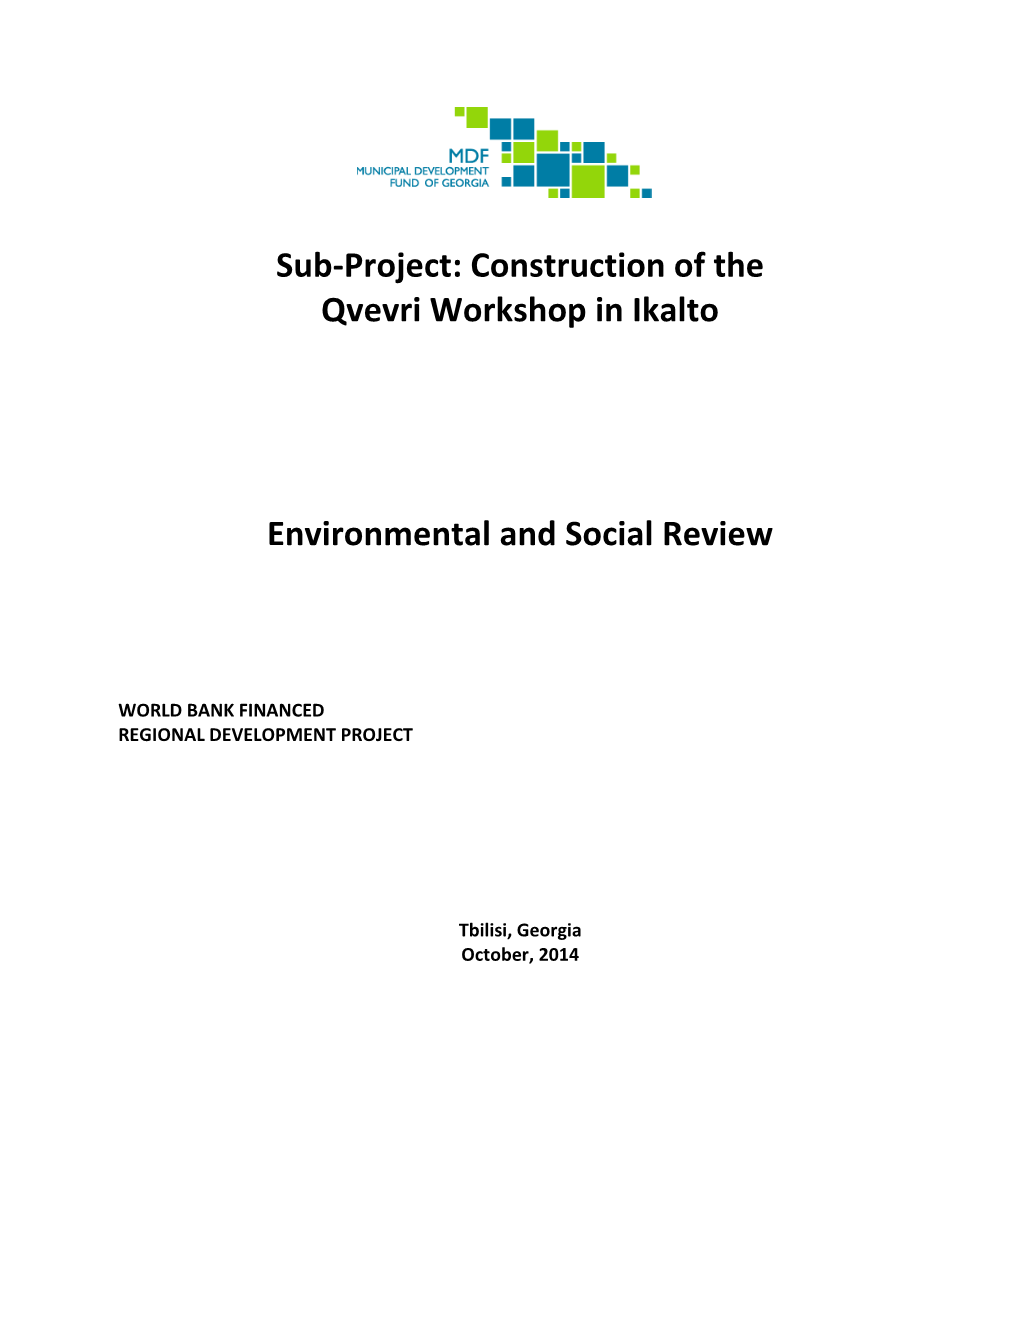 Construction of the Qvevri Workshop in Ikalto Environmental and Social